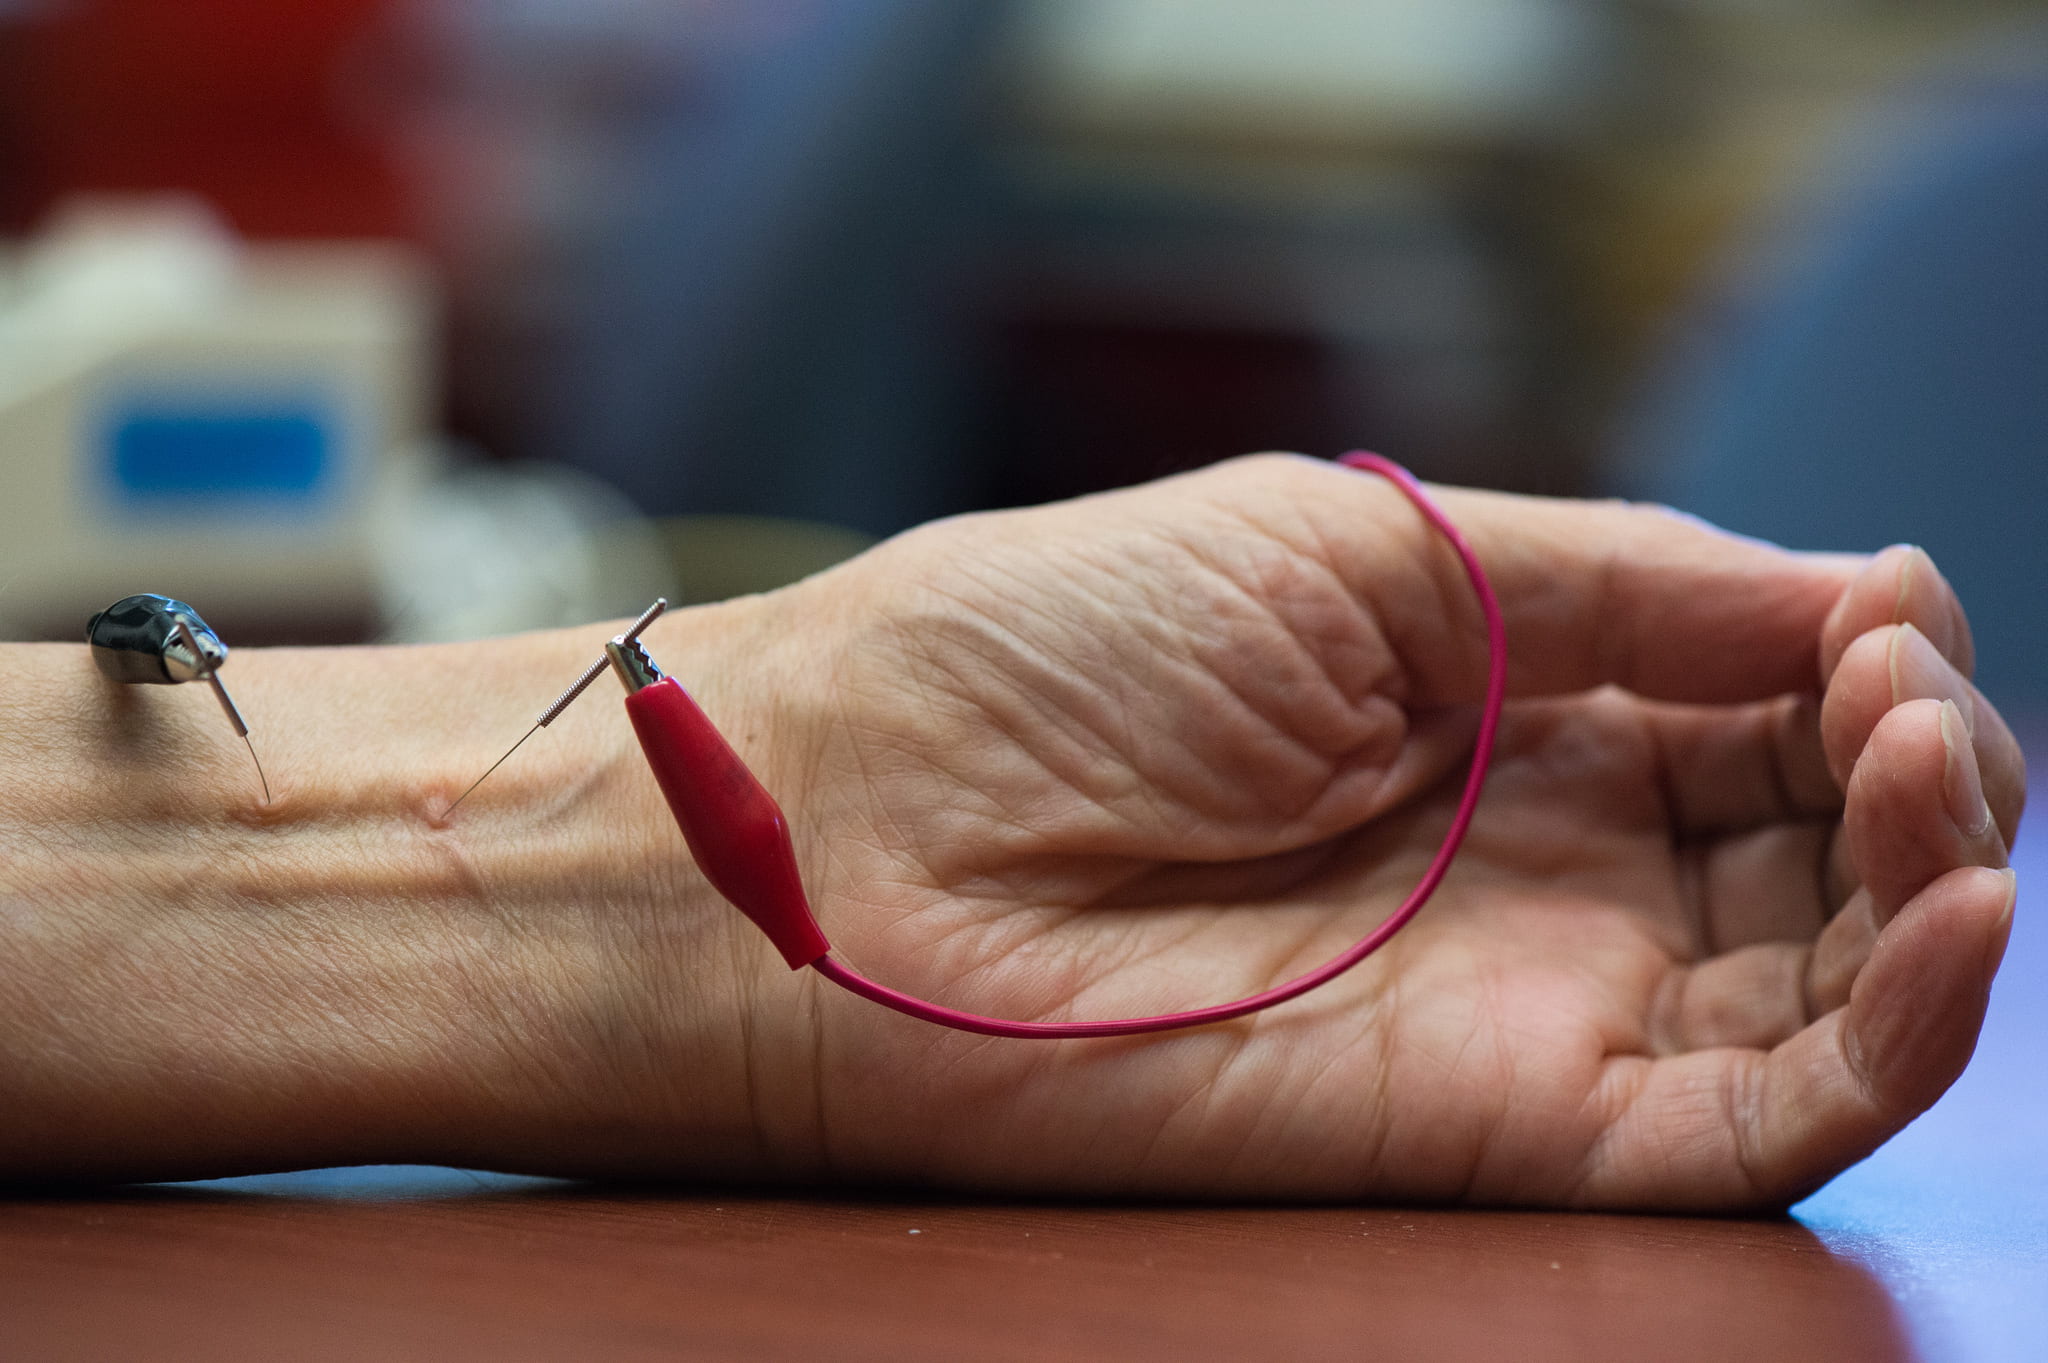 A patient receiving electroacupuncture – a form of acupuncture that employs low-intensity electrical stimulation